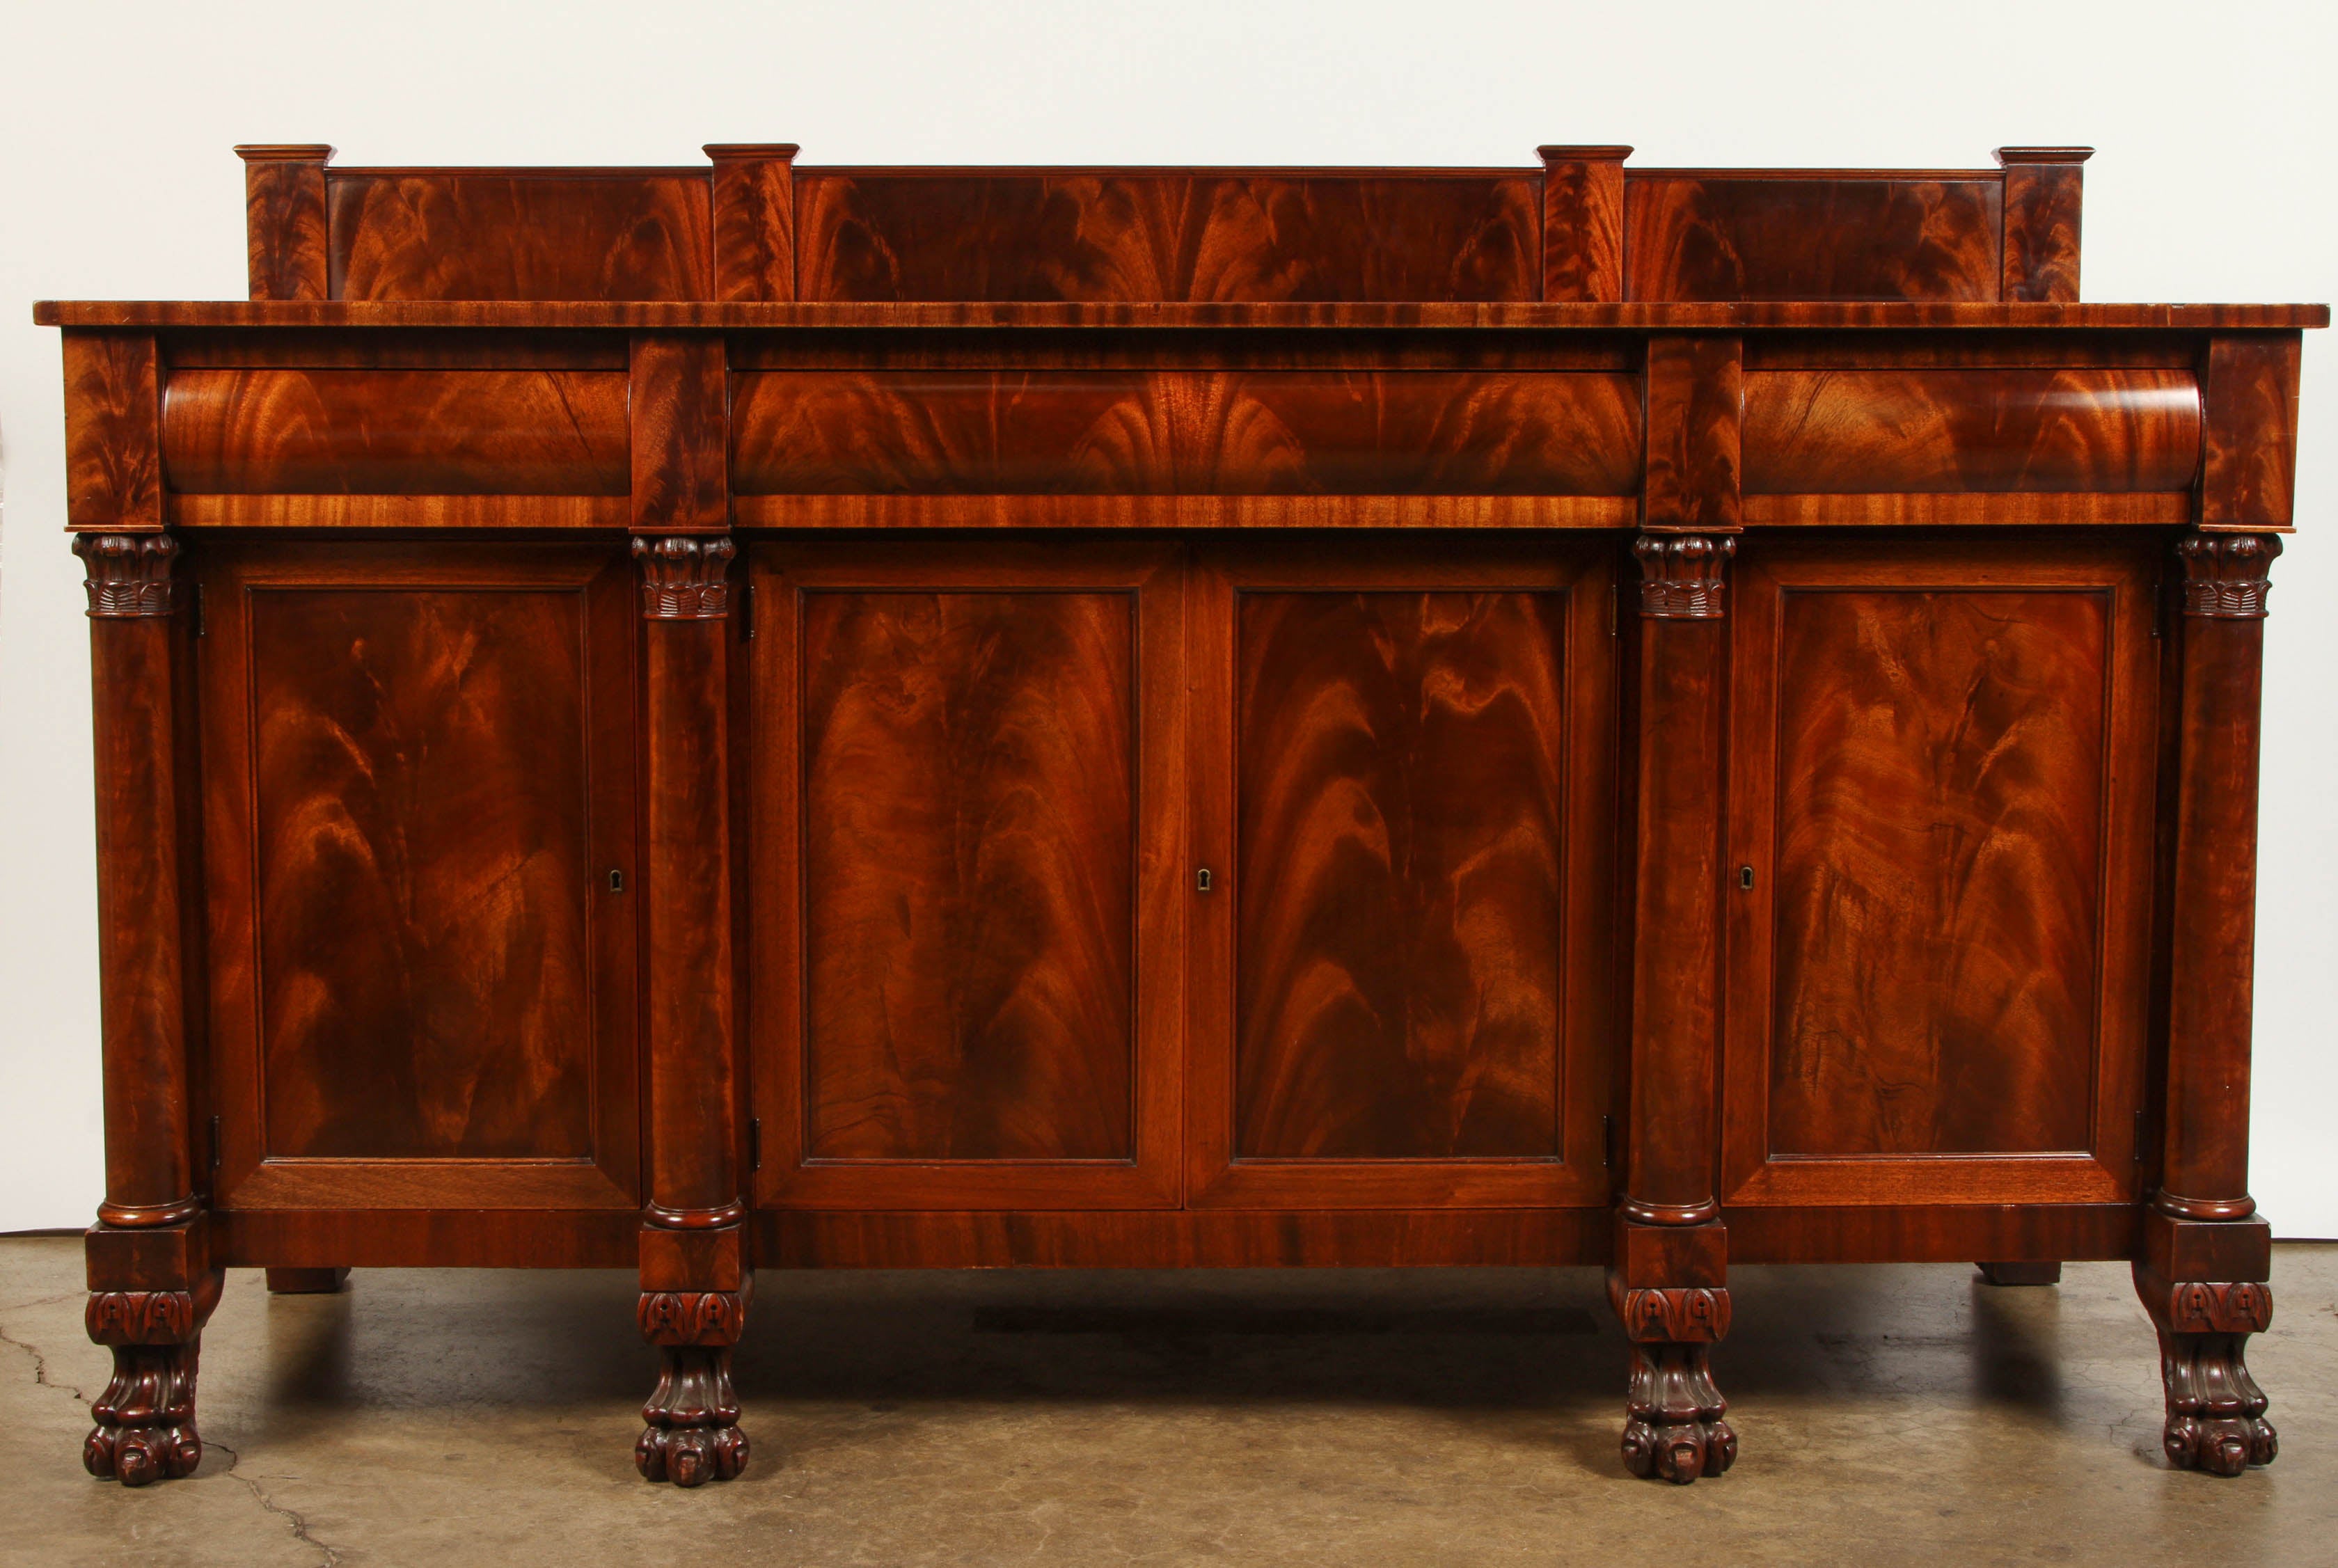 An American Crotch Mahogany sideboard, manufactured by Hathaway.  The sideboard has full columns with plinths and capitals, carved lion's foot supports, with a maker's plaque. The name is W.A. Hathaway, NY, NY. The center portion has 4 shelves, with